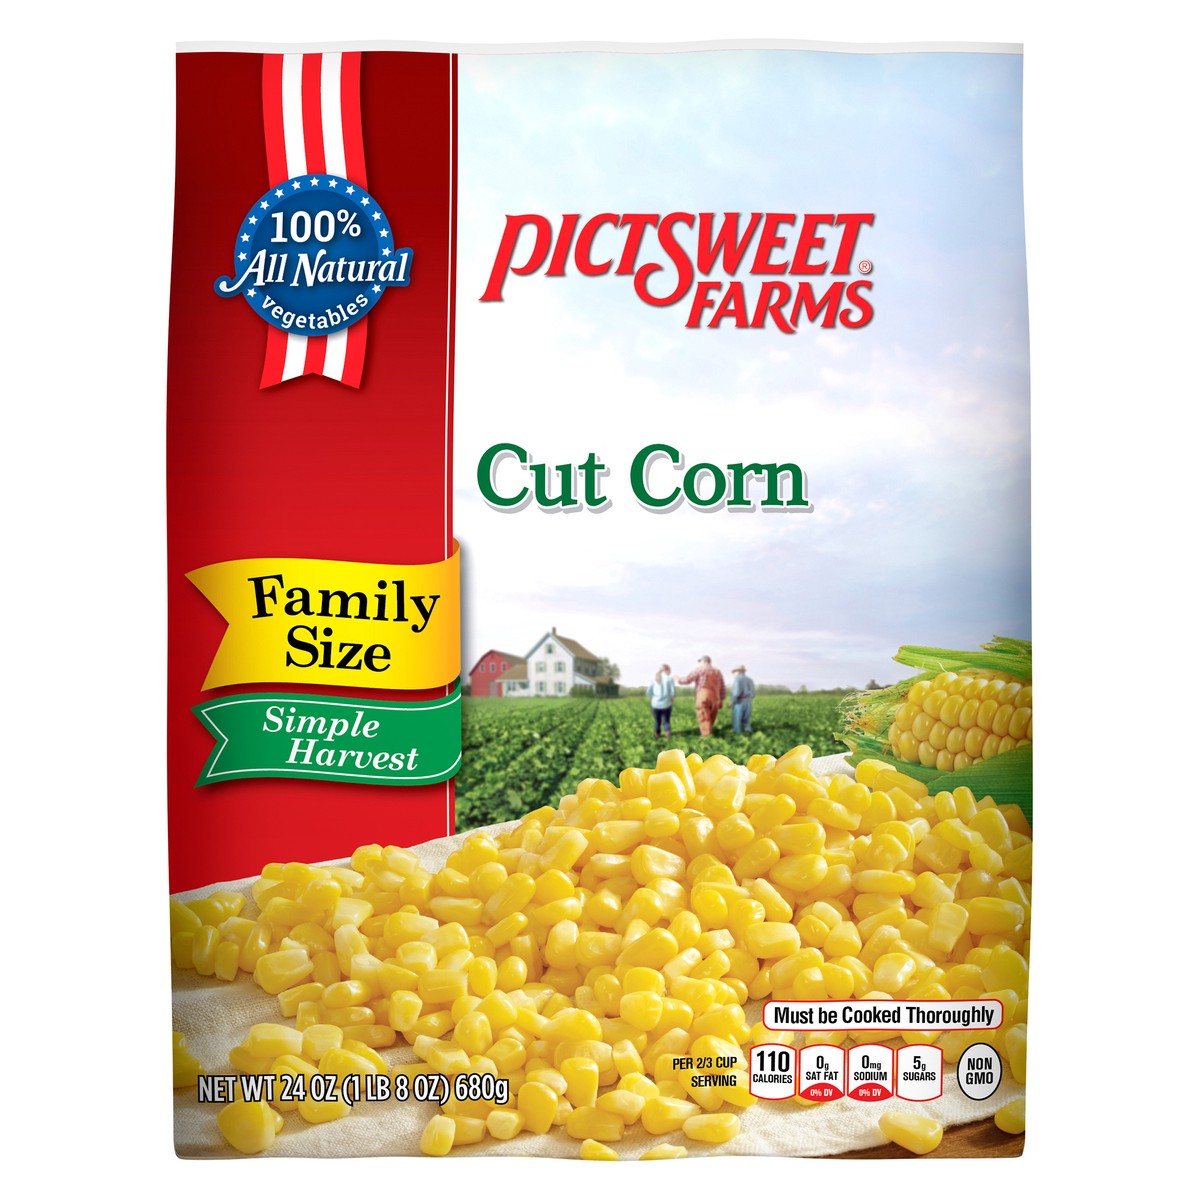 slide 3 of 3, Pictsweet Cut Corn Family Size, 24 oz